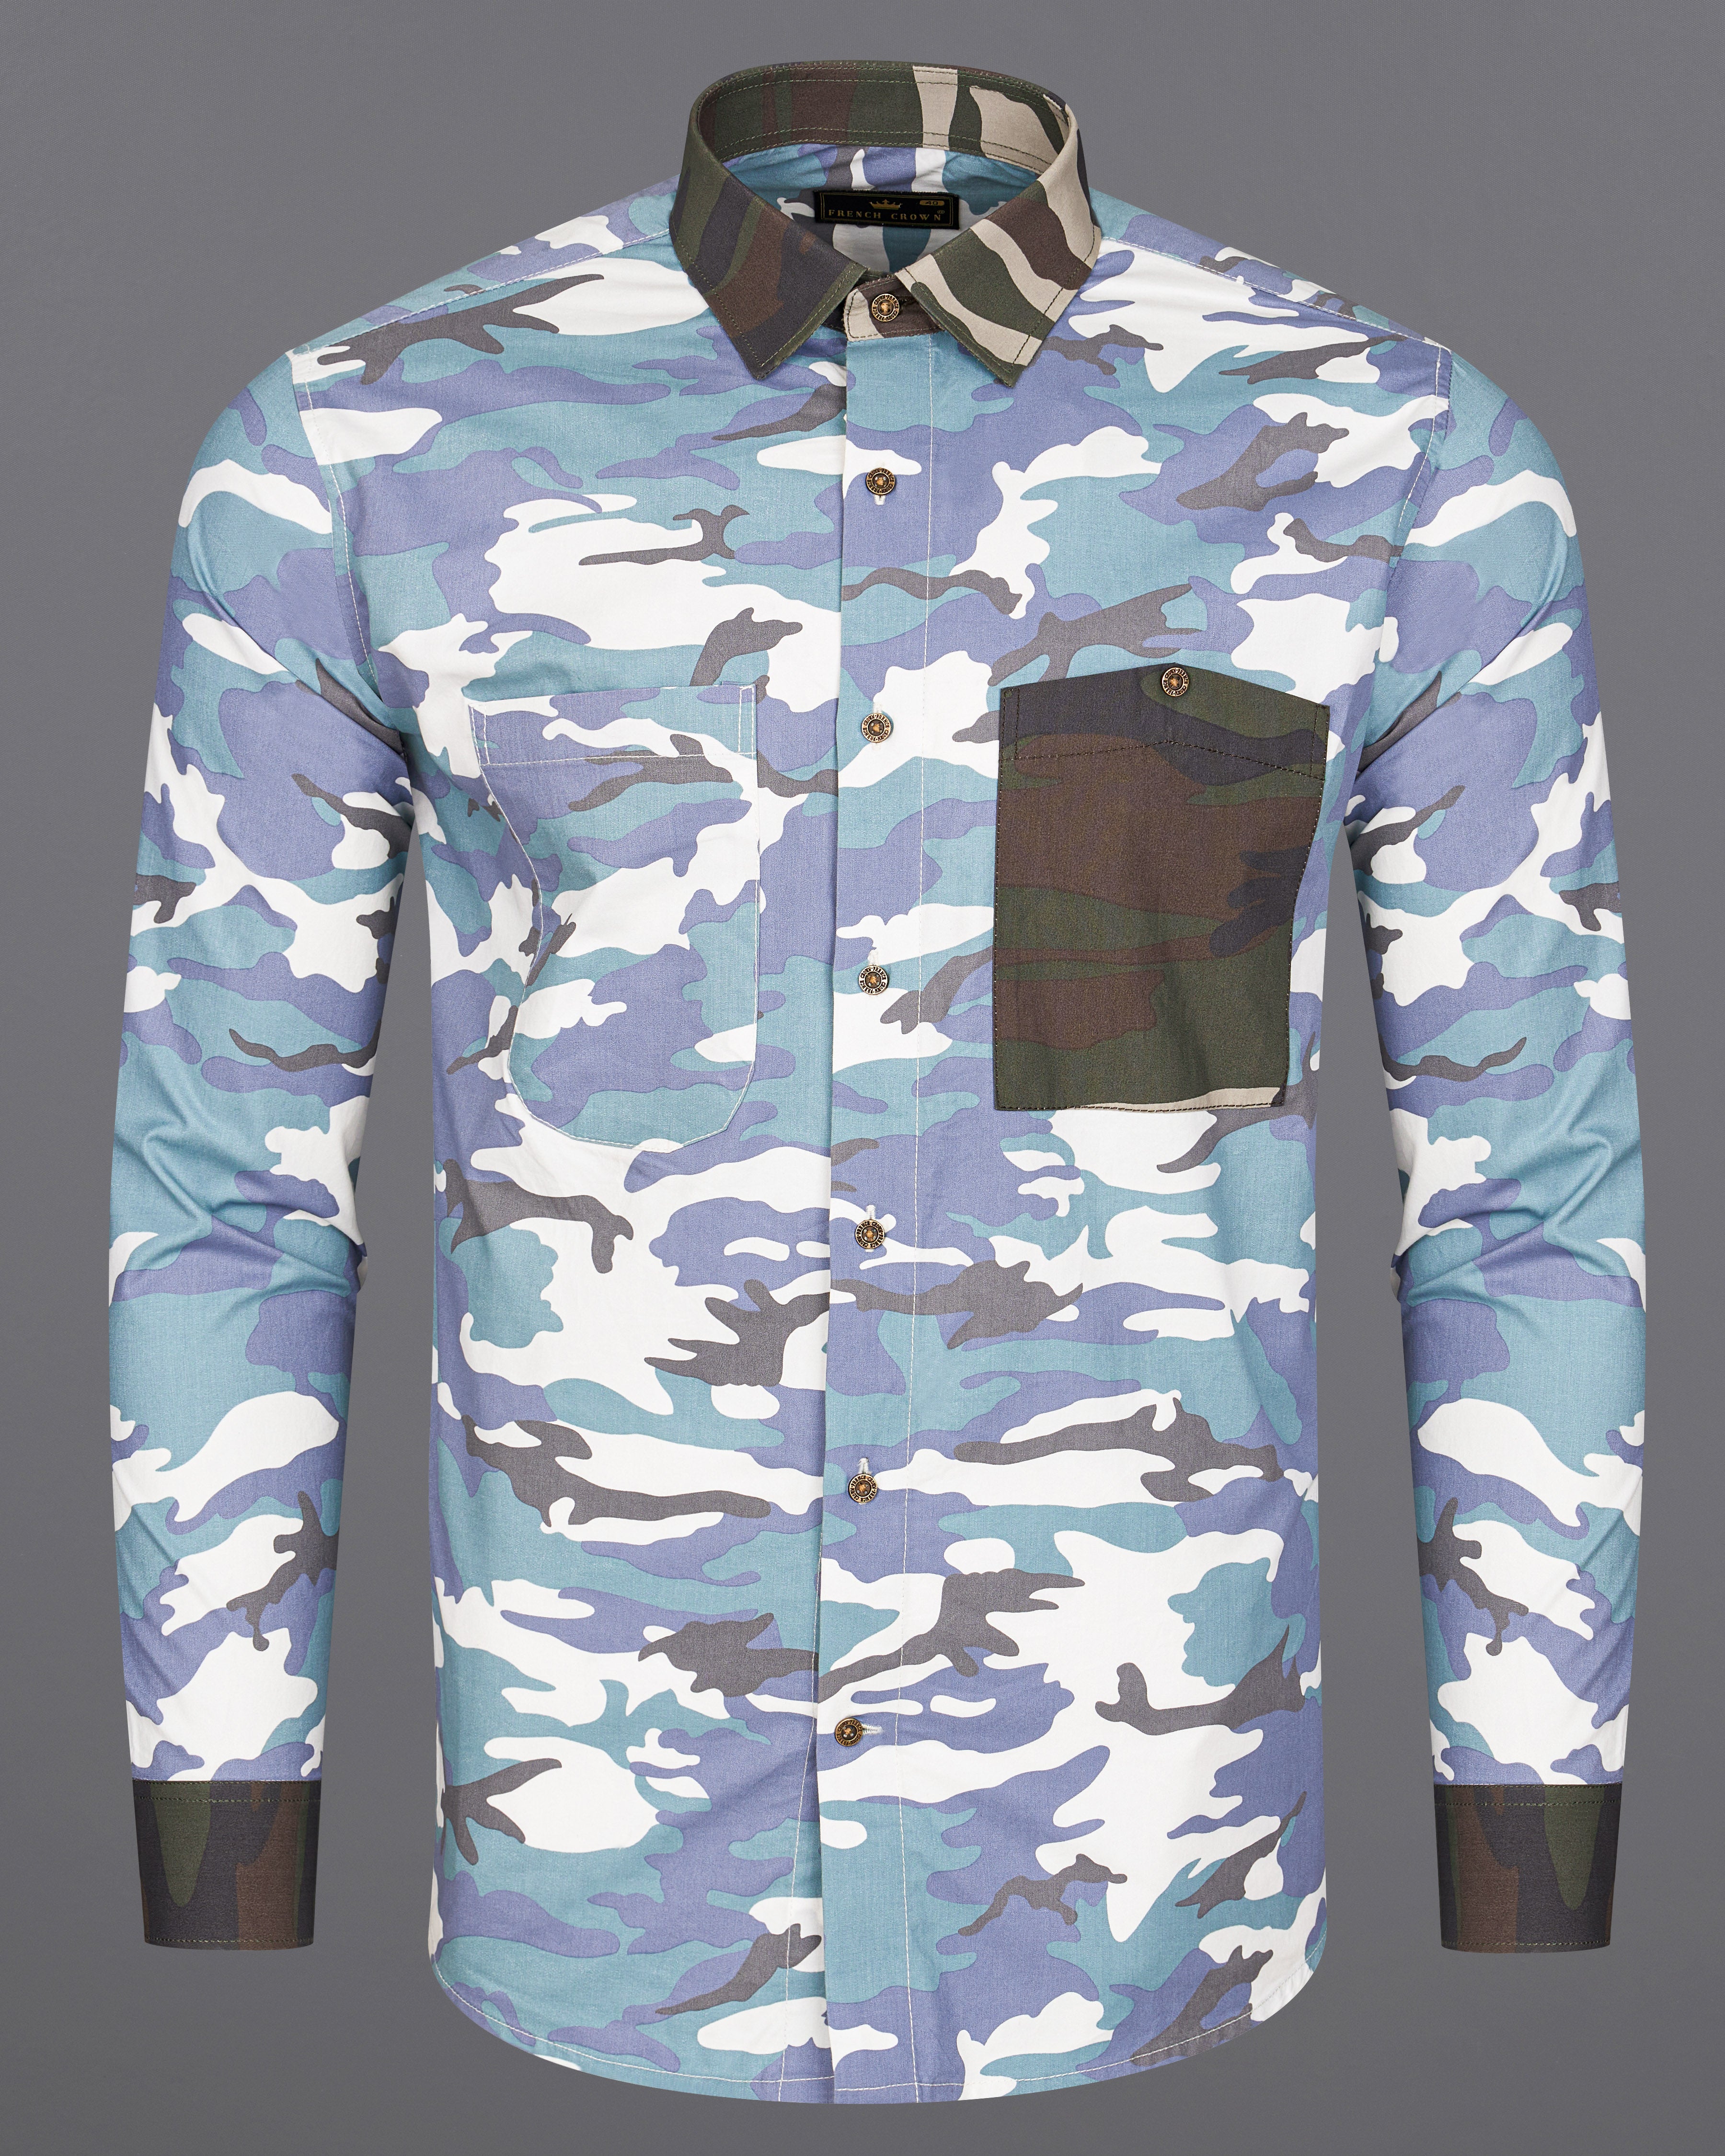 Comet Blue With Multicoloured  Camouflage Printed Royal Oxford Designer Shirt 8905-MB-P333-38, 8905-MB-P333-H-38,  8905-MB-P333-39,  8905-MB-P333-H-39,  8905-MB-P333-40,  8905-MB-P333-H-40,  8905-MB-P333-42,  8905-MB-P333-H-42,  8905-MB-P333-44,  8905-MB-P333-H-44,  8905-MB-P333-46,  8905-MB-P333-H-46,  8905-MB-P333-48,  8905-MB-P333-H-48,  8905-MB-P333-50,  8905-MB-P333-H-50,  8905-MB-P333-52,  8905-MB-P333-H-52